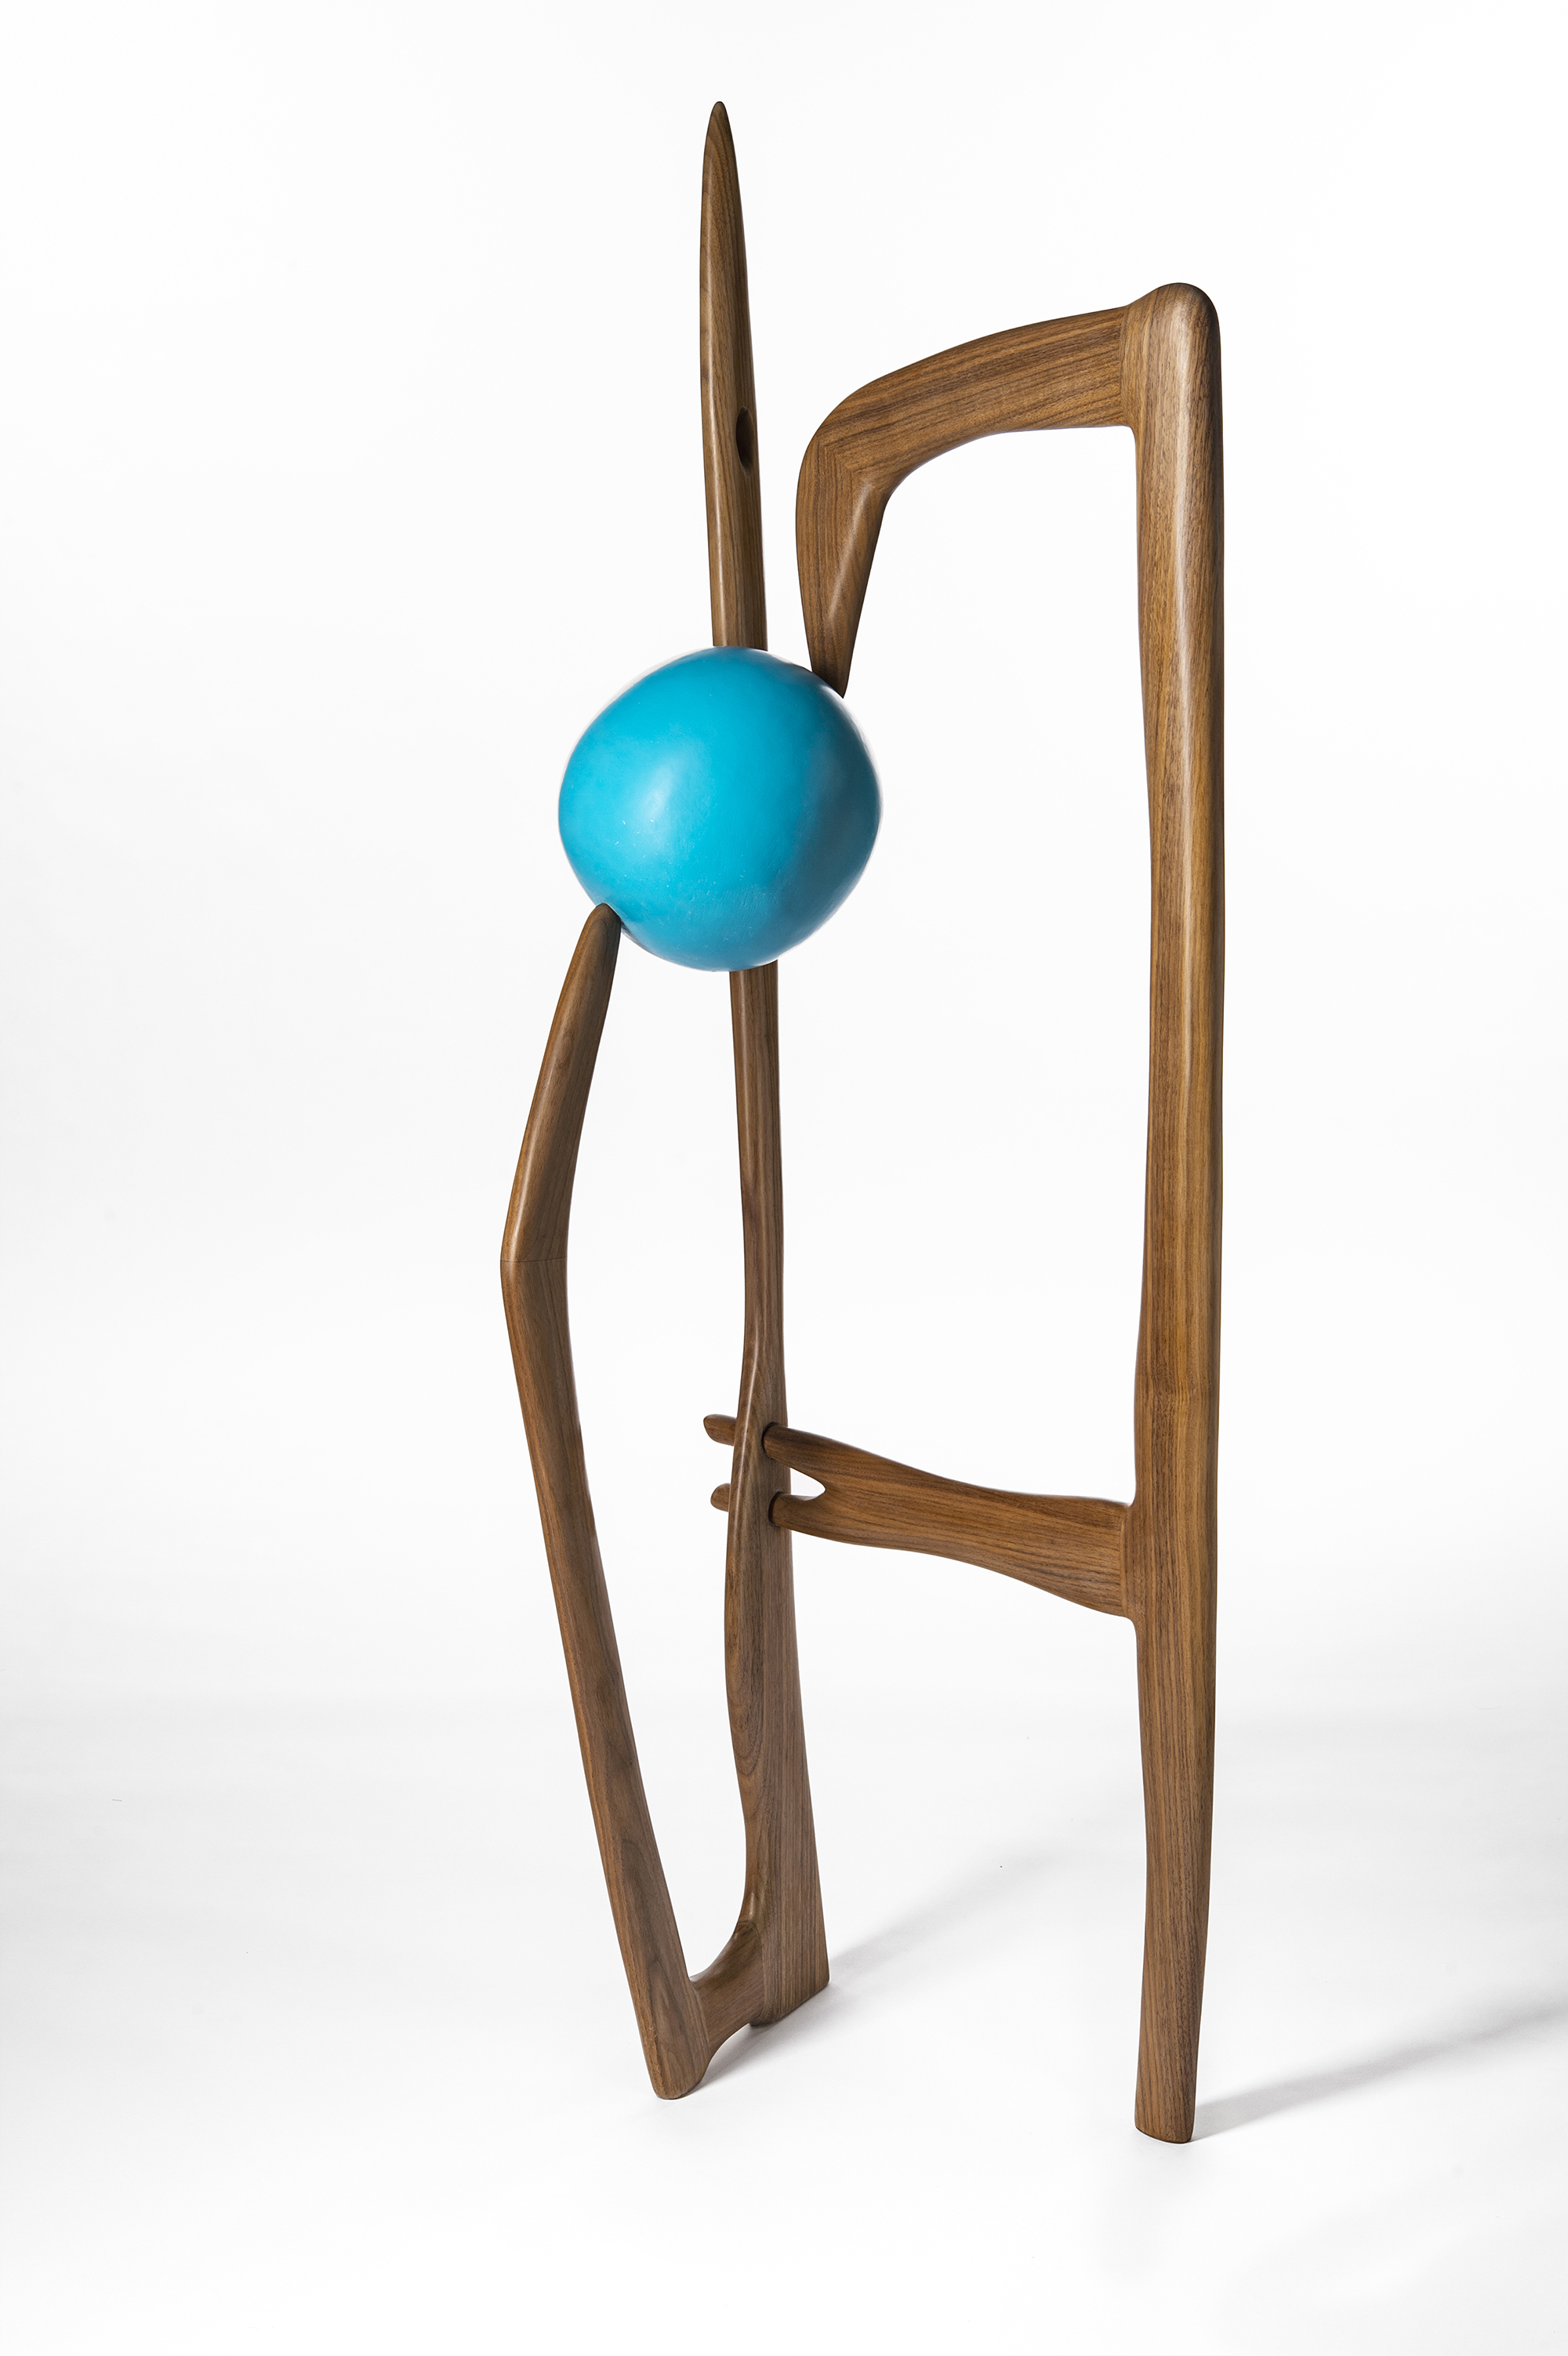 A wood sculpture connected to a large blue ball.